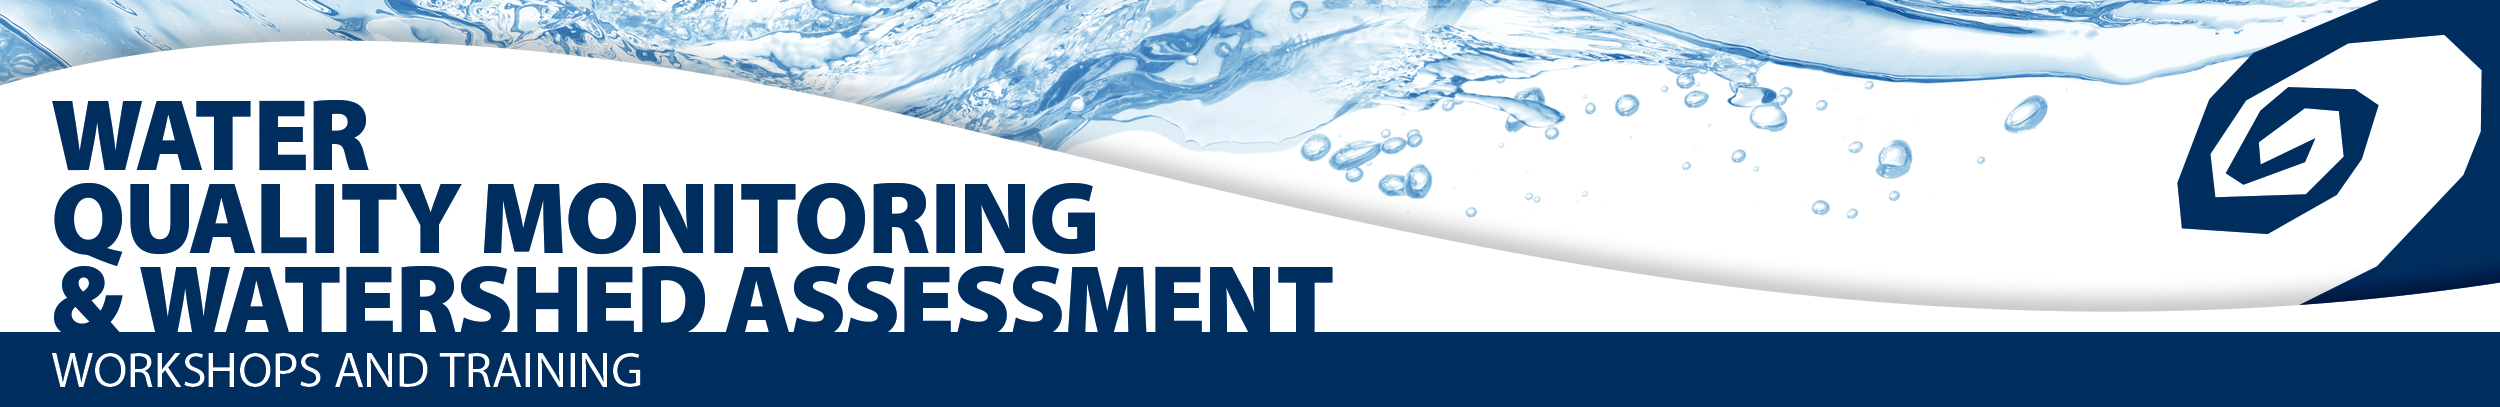 Water Quality Monitoring & Watershed Assessment Workshops & Training banner